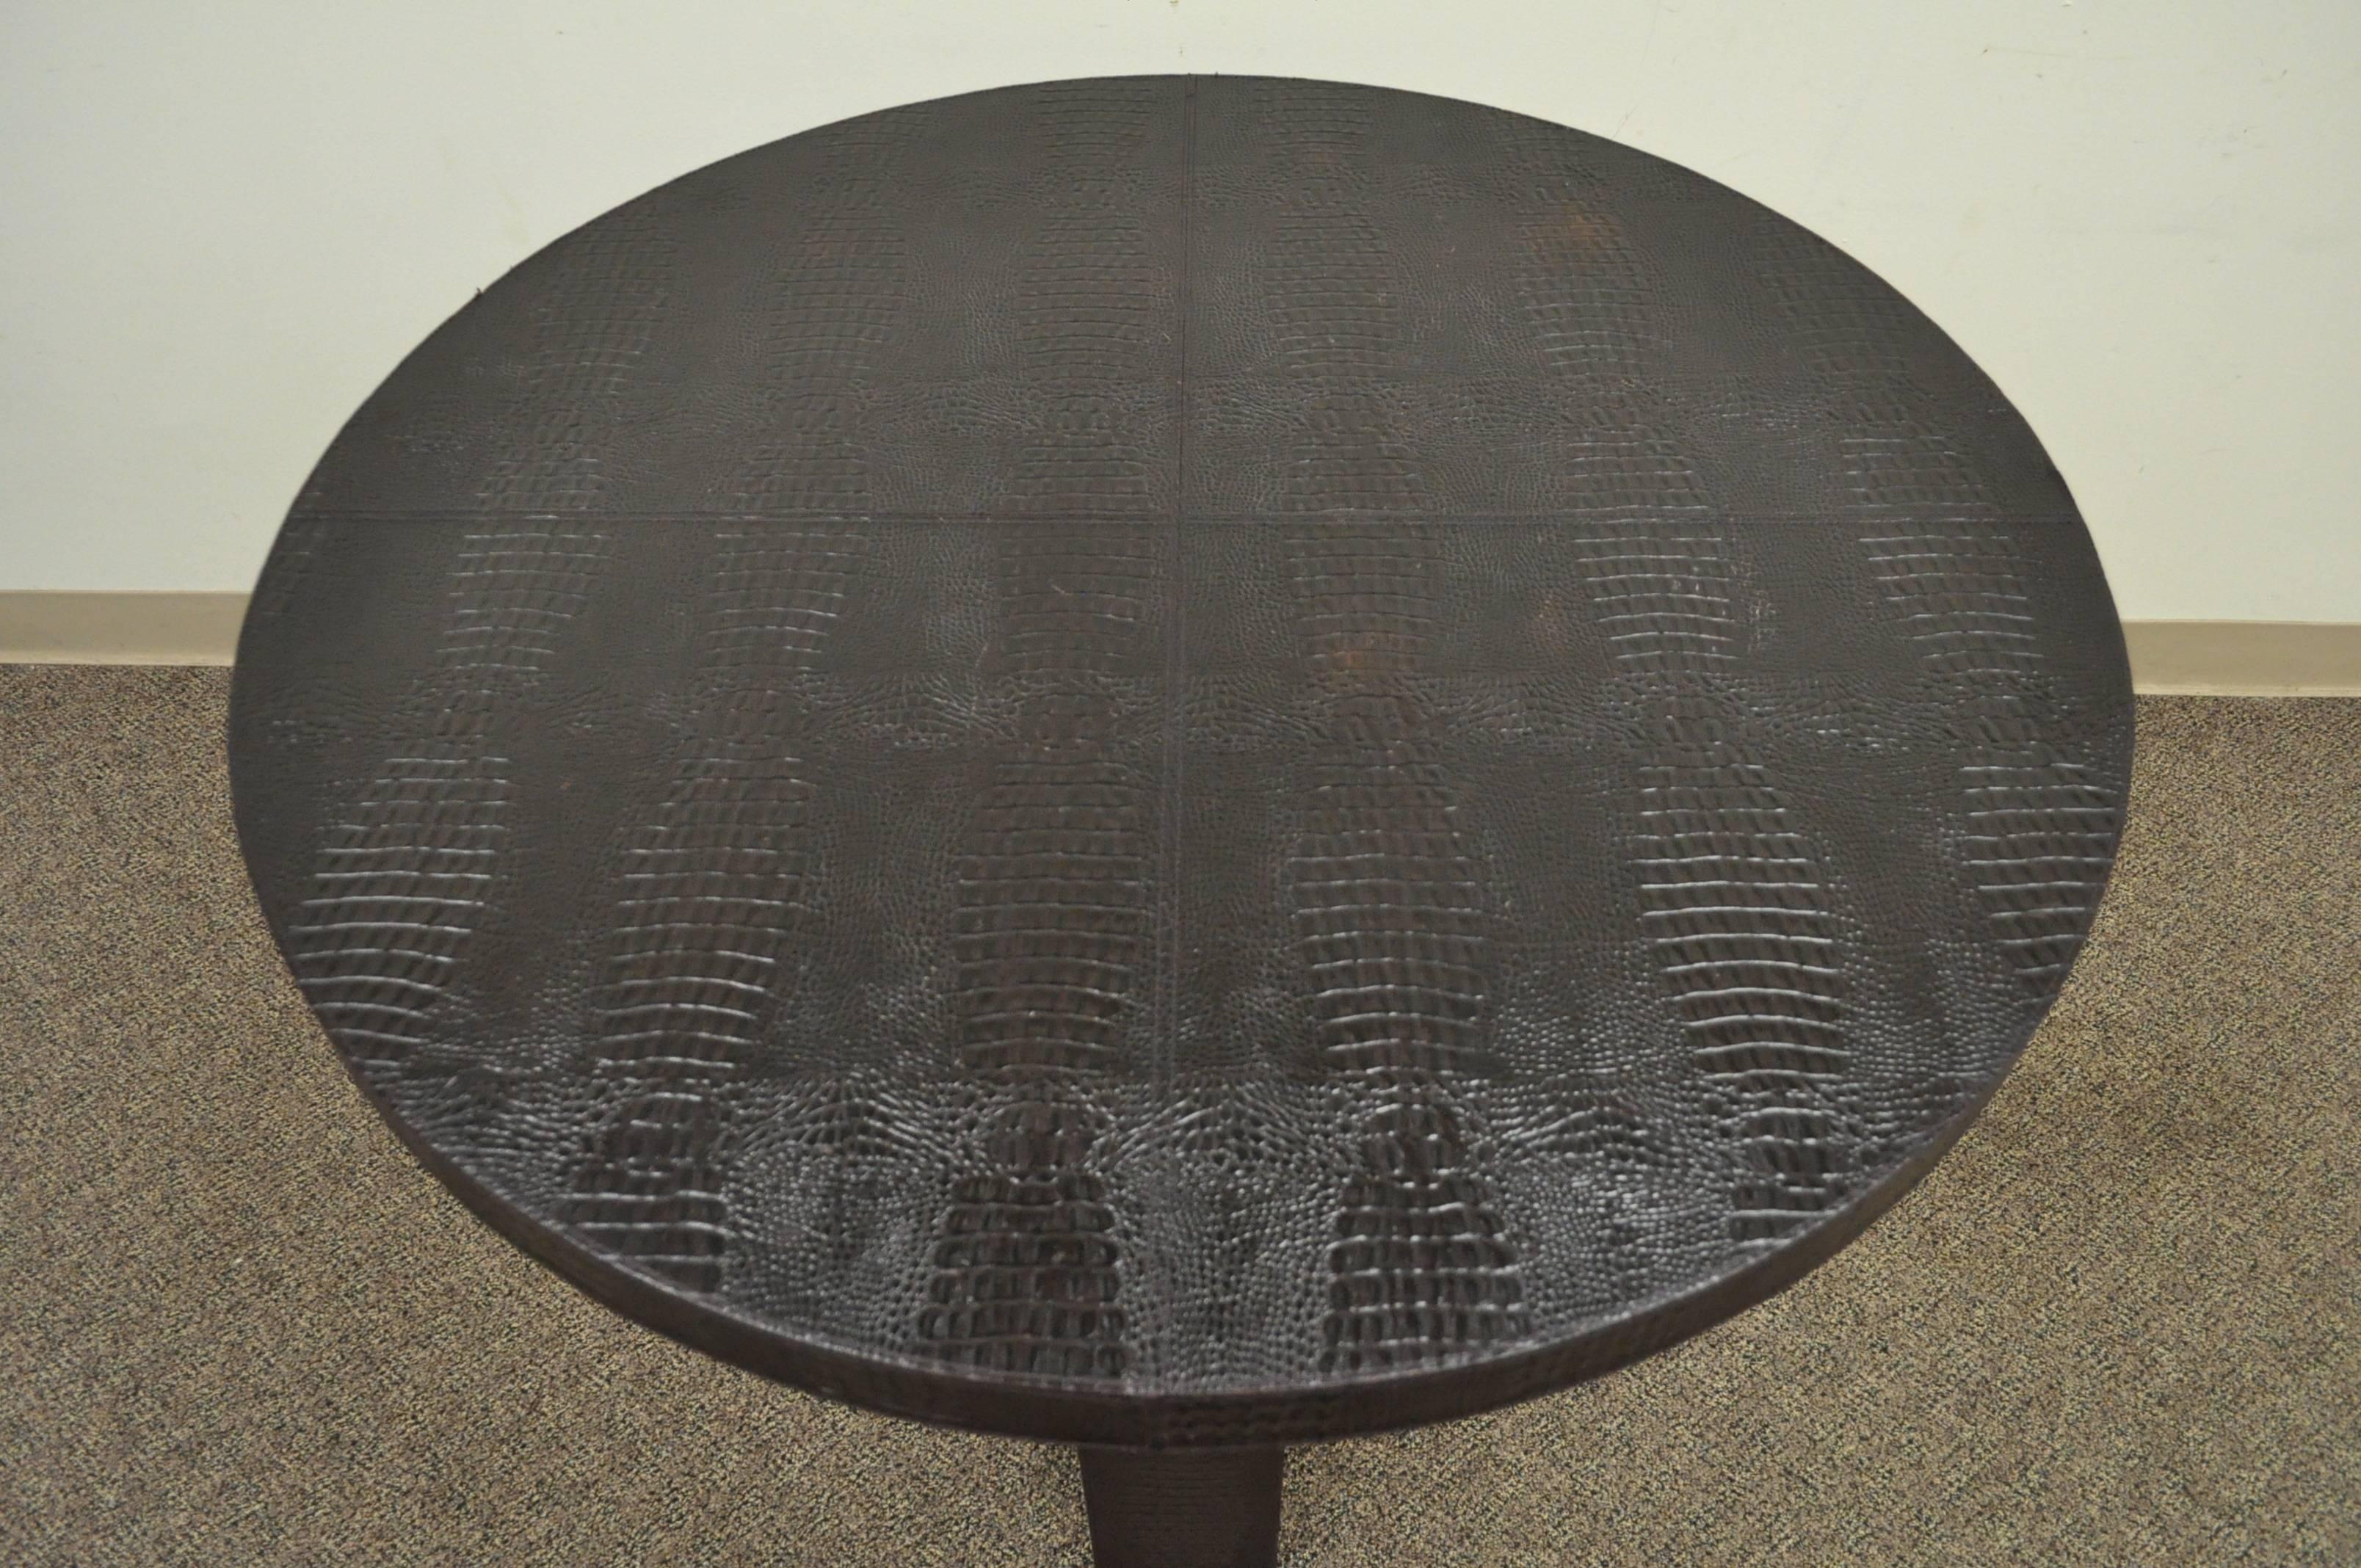 High style designer center table by Serge de Troyer. Table features an alligator or crocodile embossed Italian leather stitched and wrapped frame, X-form base and great modernist form.